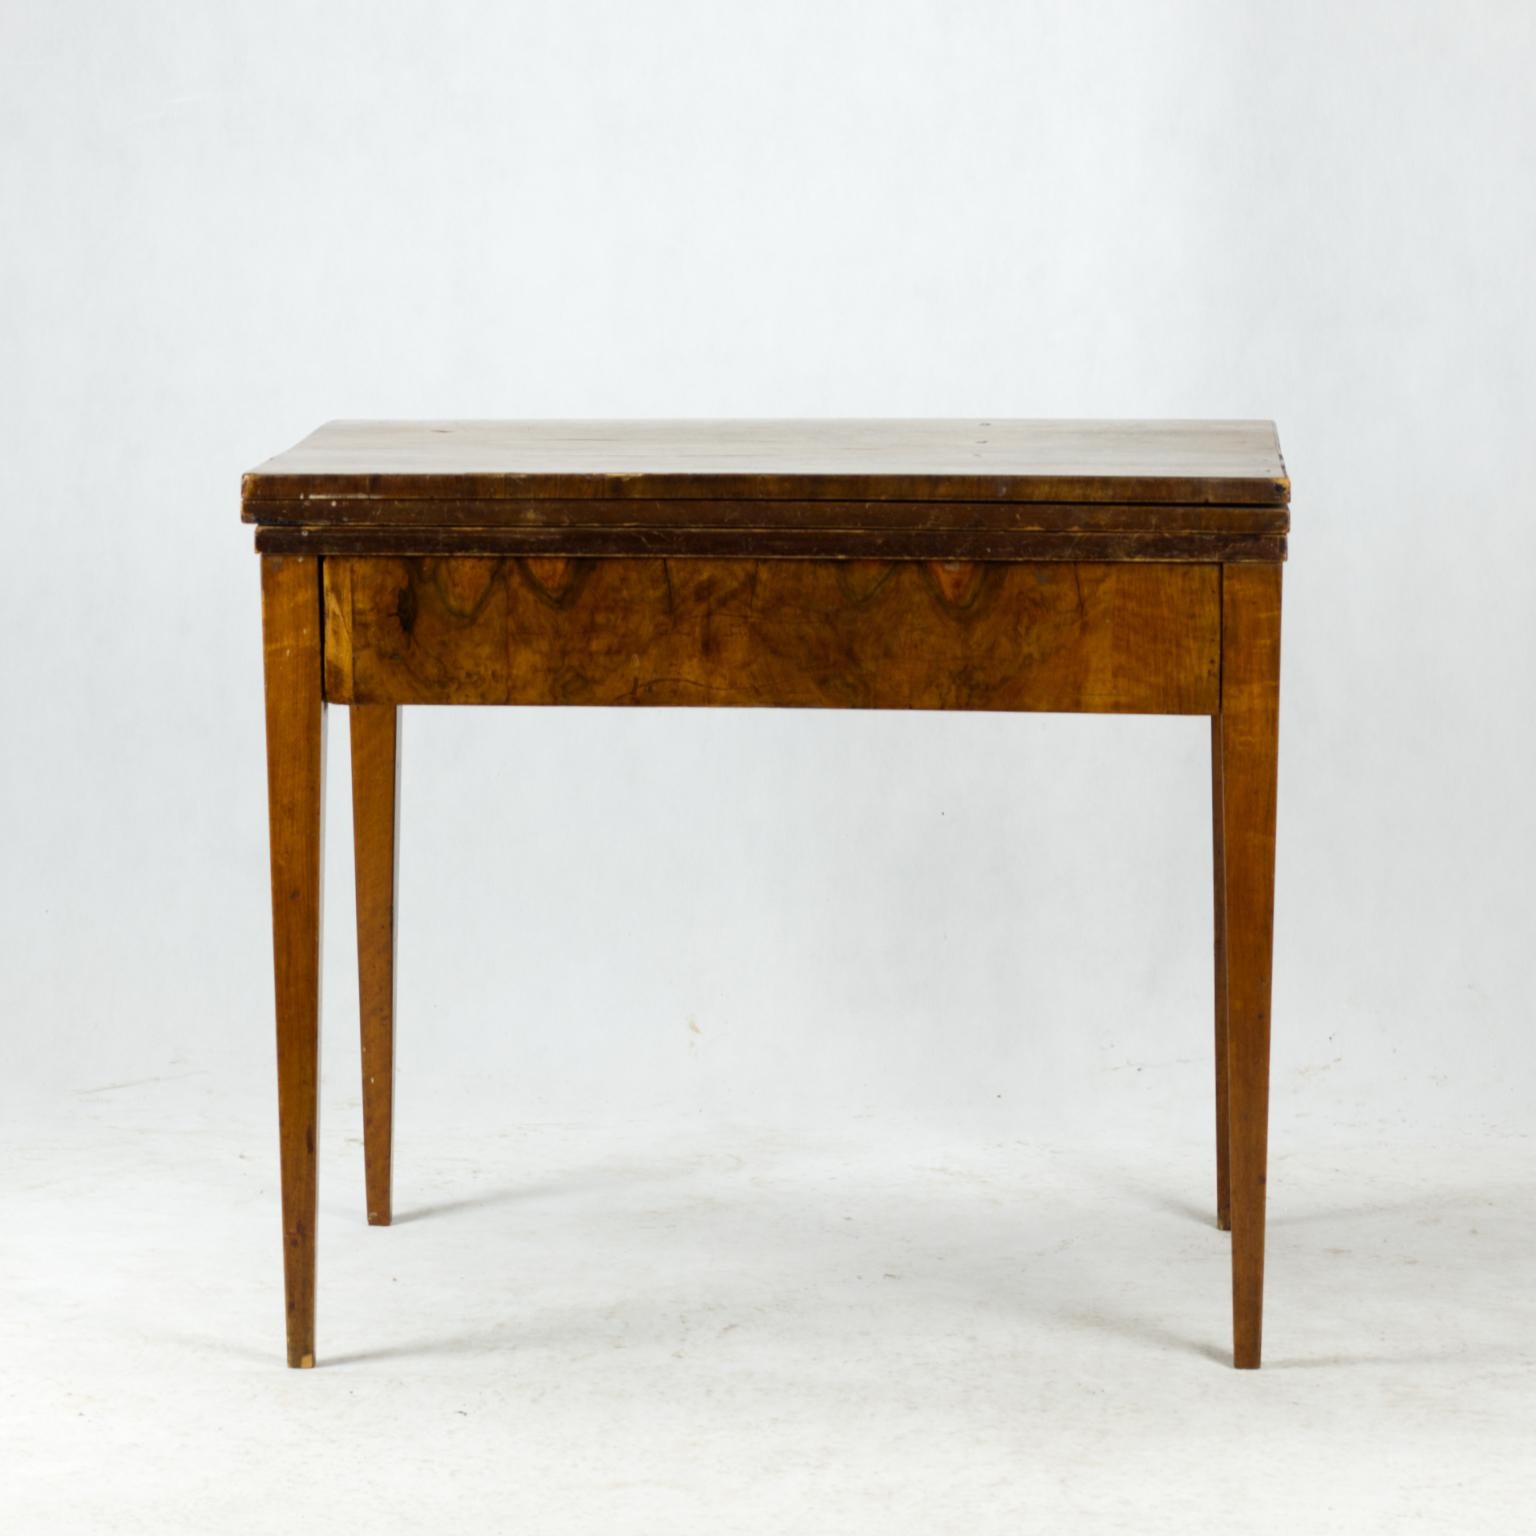 The table dates from the early Biedermeier period at the beginning of the 19th century. The body of the table is made of spruce wood and was covered with a very beautiful thick walnut veneer. The table is in good condition. The size of the spread